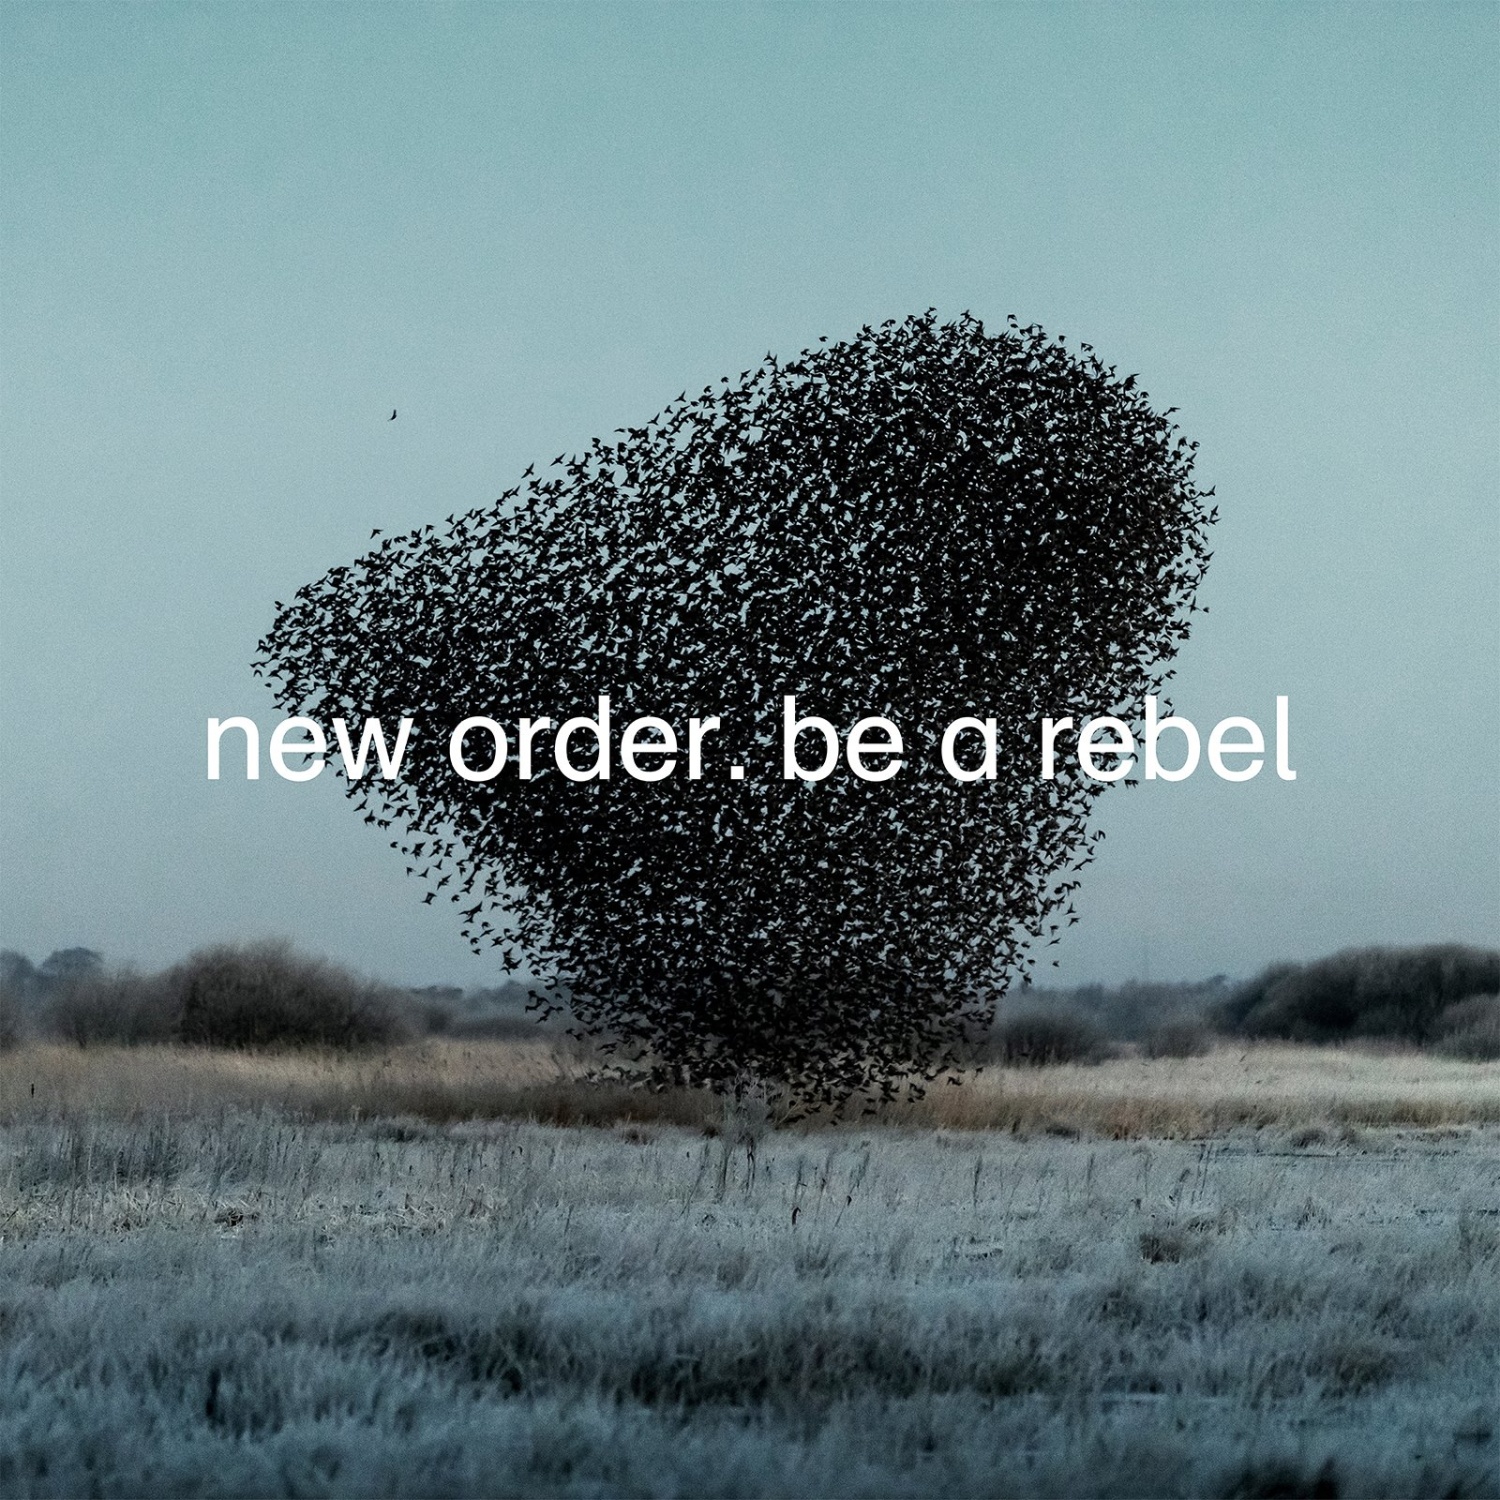 New Order - Be A Rebel vinyl cover